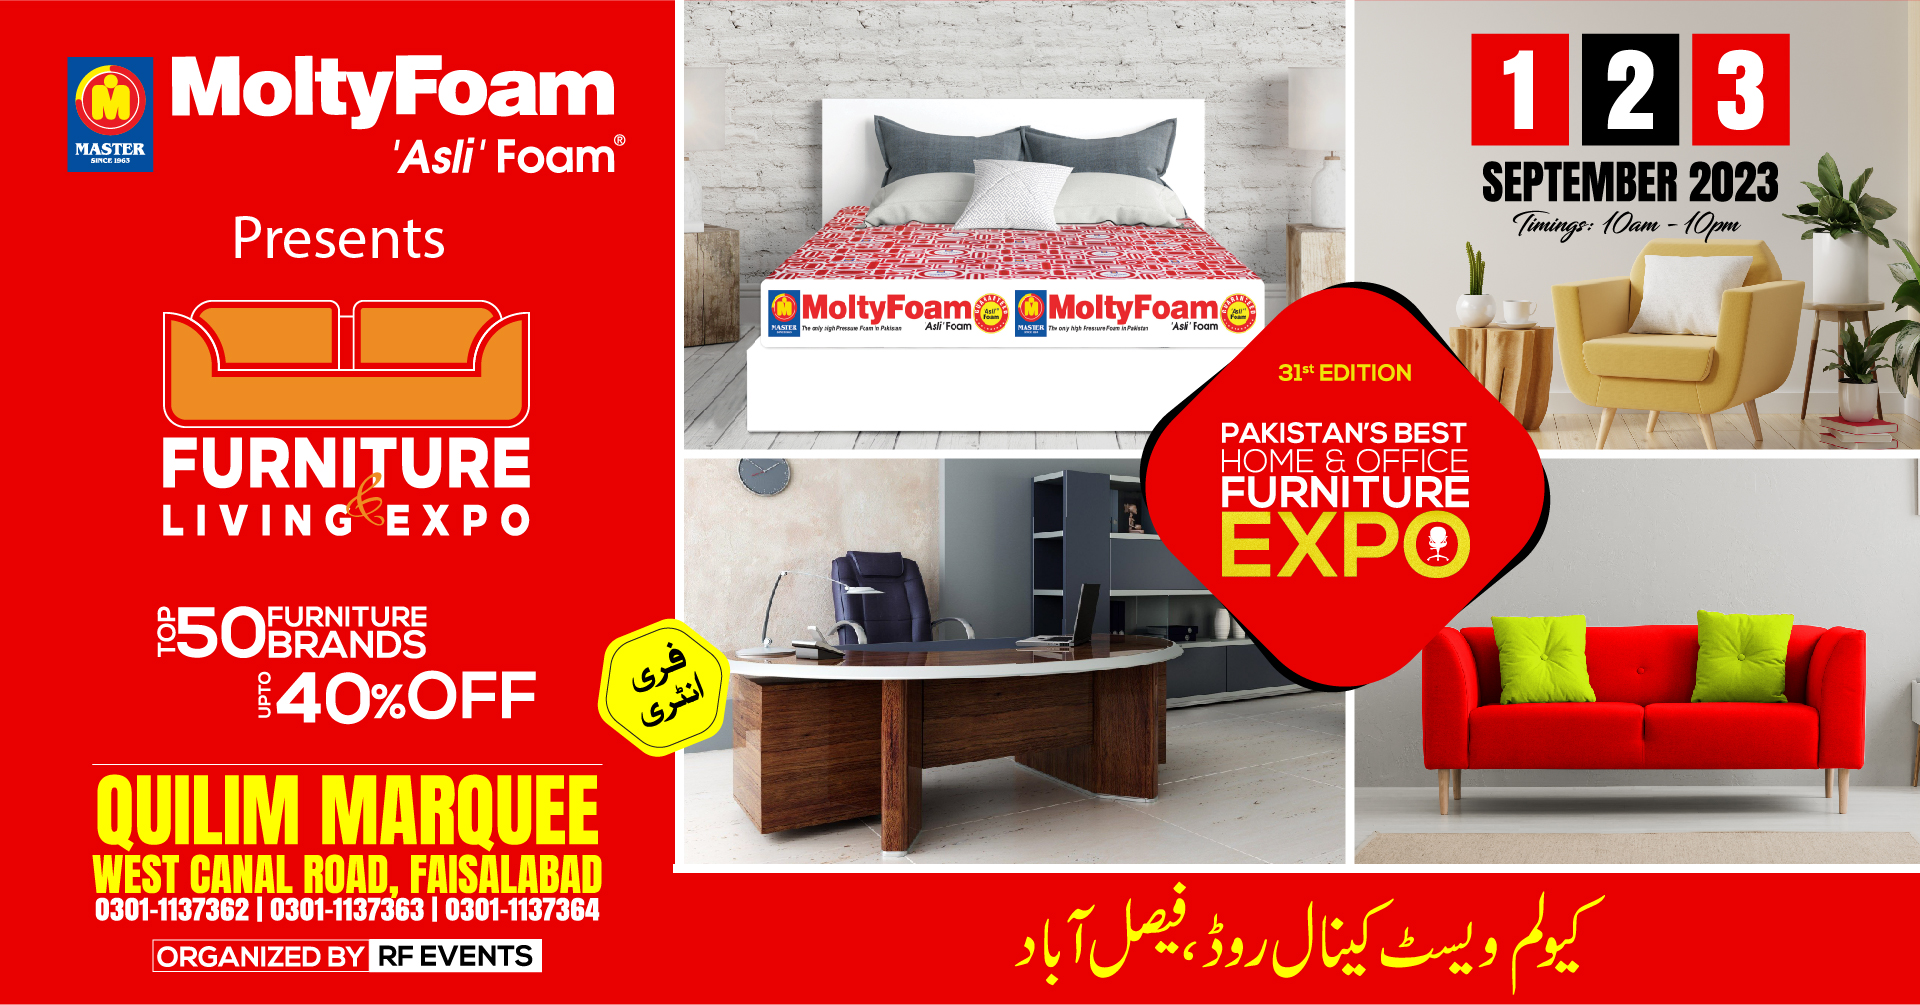 Faisalabad Furniture and Living Expo on 1,2,3 September 2023 at Quilim Marquee West Canal Road, Faisalabad, Punjab, Pakistan